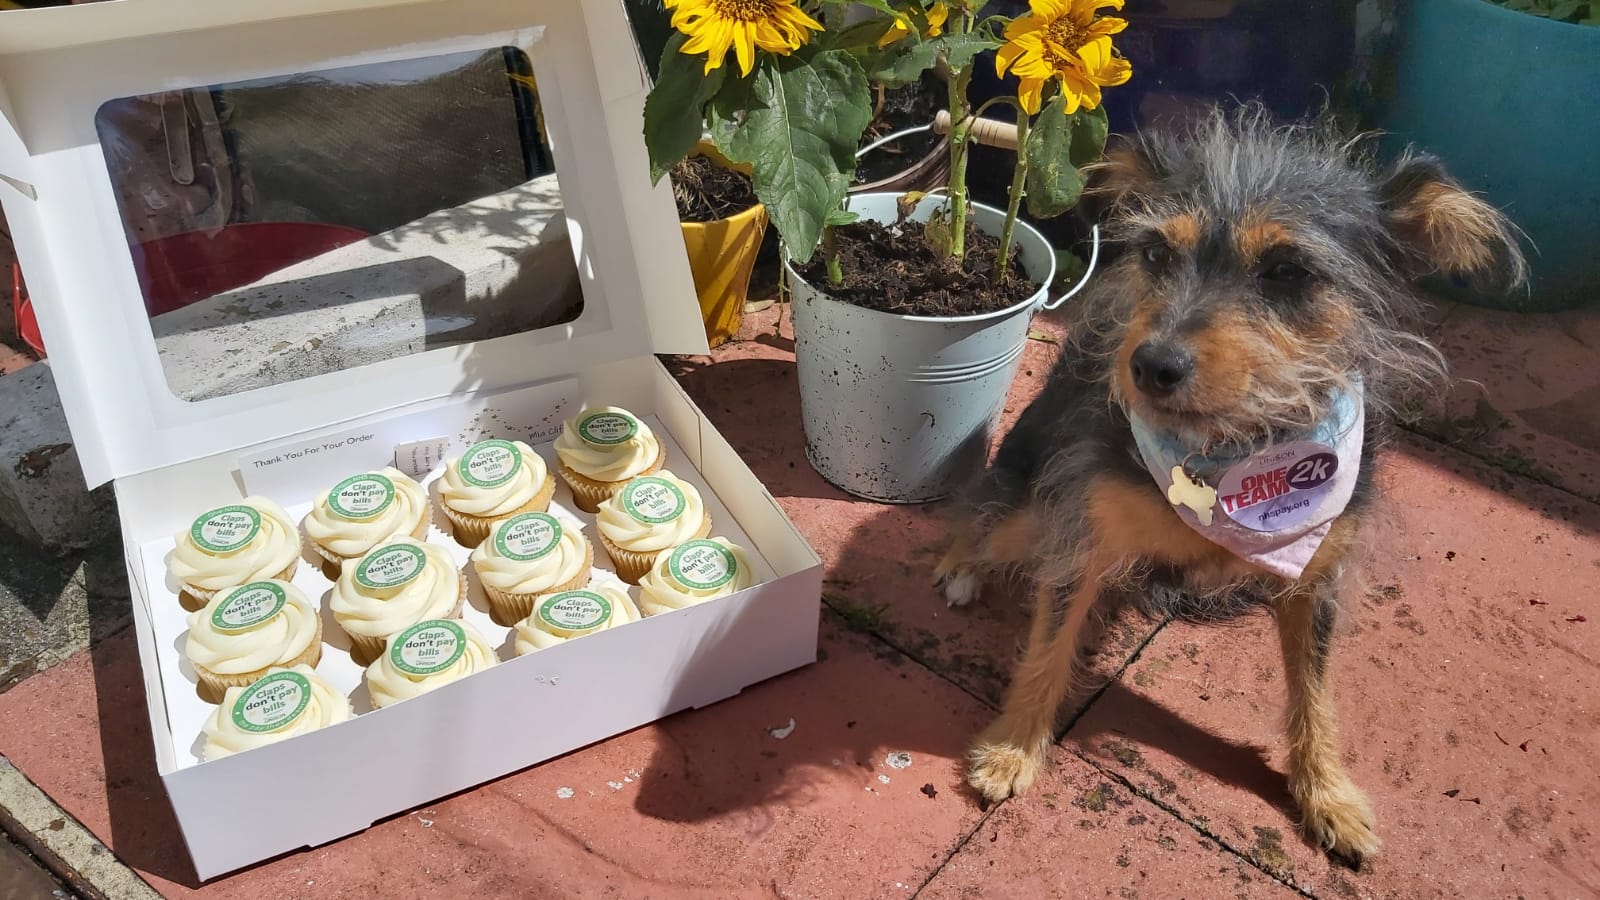 image of a box of cupcakes decorated with campaign message 'claps don't pay bills' there is a small black and tan dog next to the box of cakes